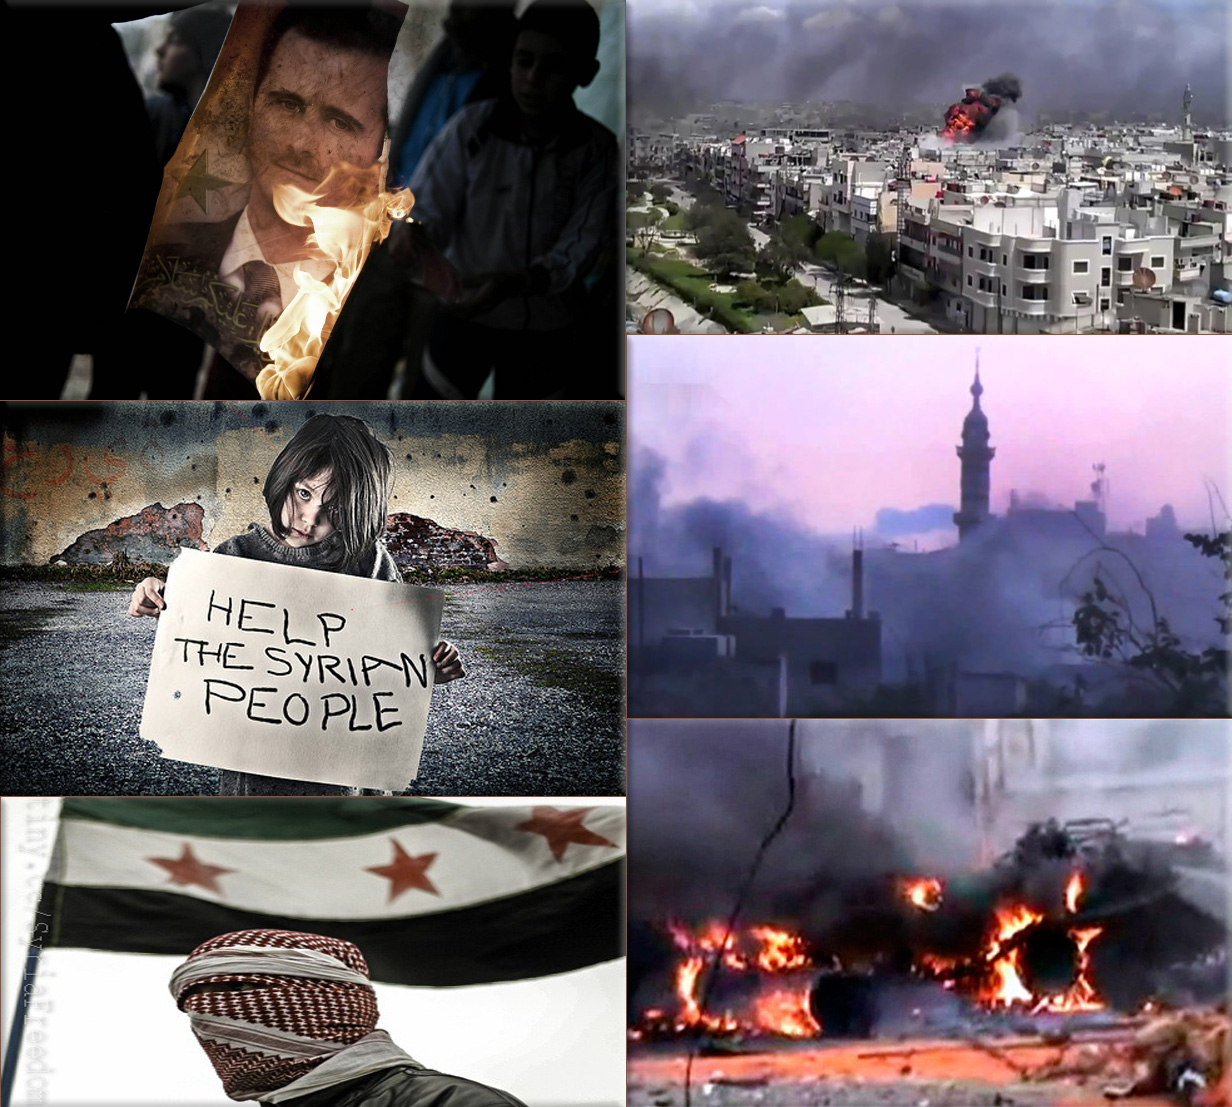 Arab Spring: Syrian civil war; Syrian uprising, an armed conflict in Syria between forces loyal to the Ba'ath Party government and those seeking to oust it